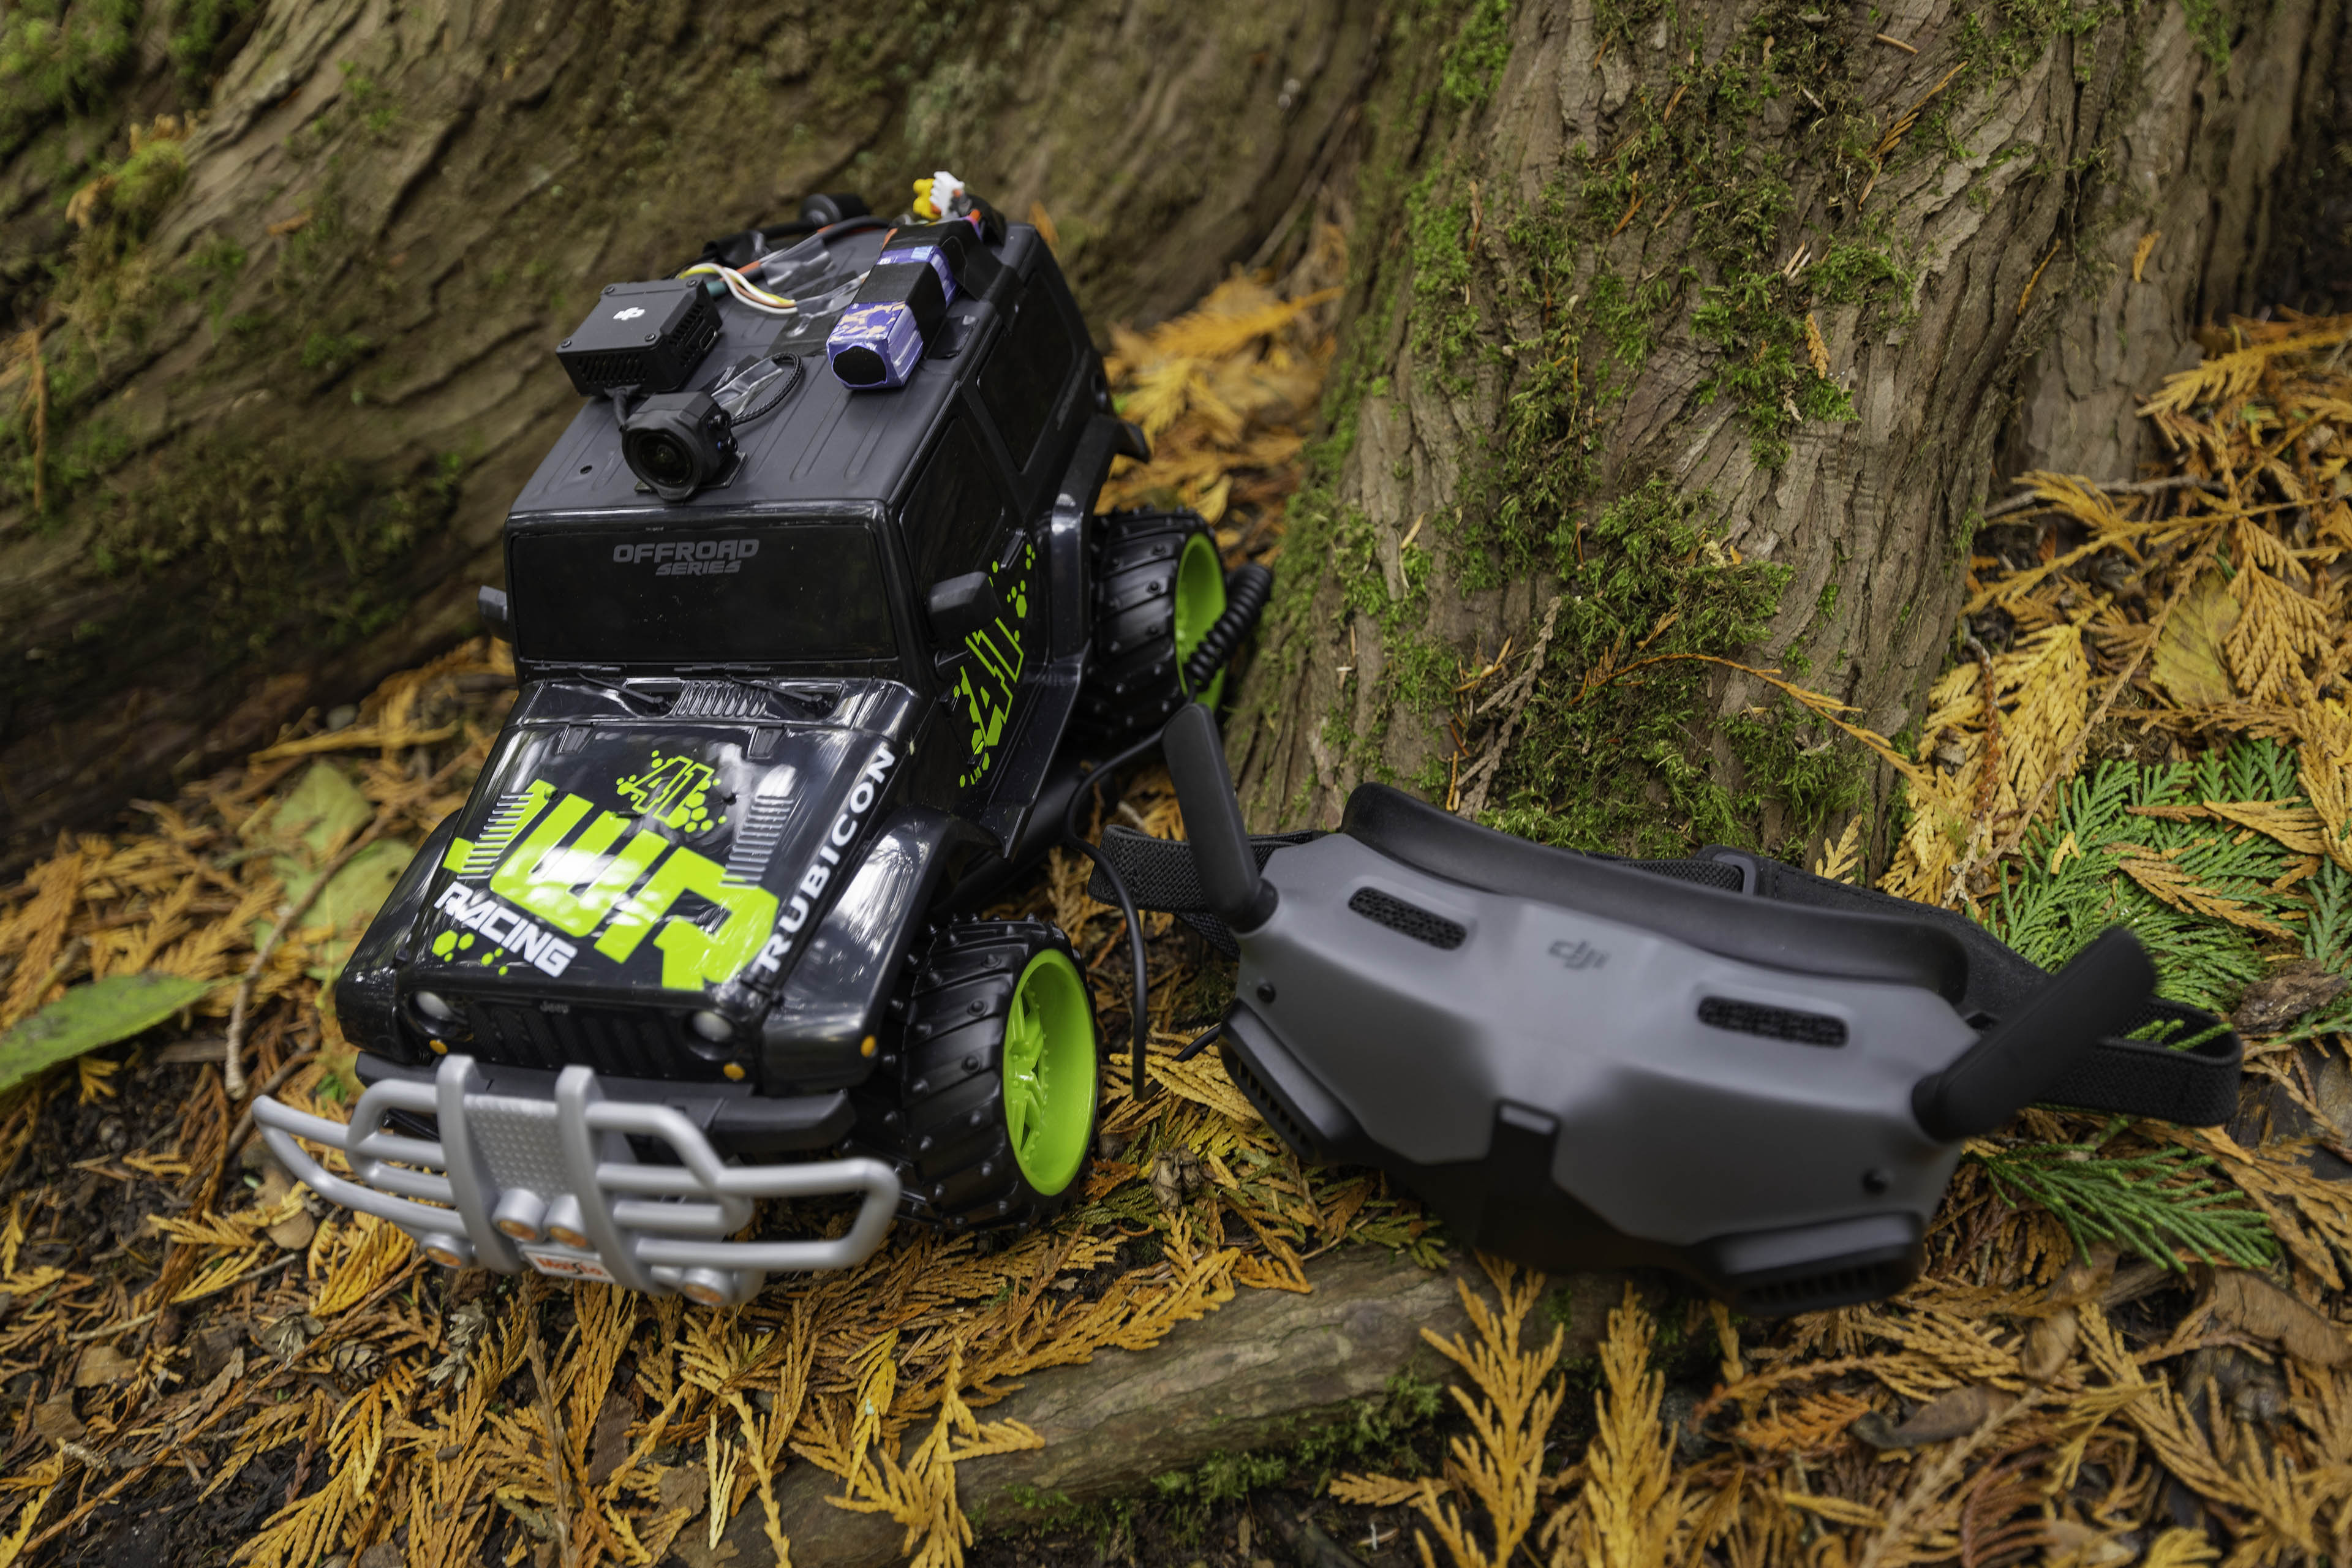 The DJI O3 Air Unit and DJI Goggles 2 with an RC monster truck.